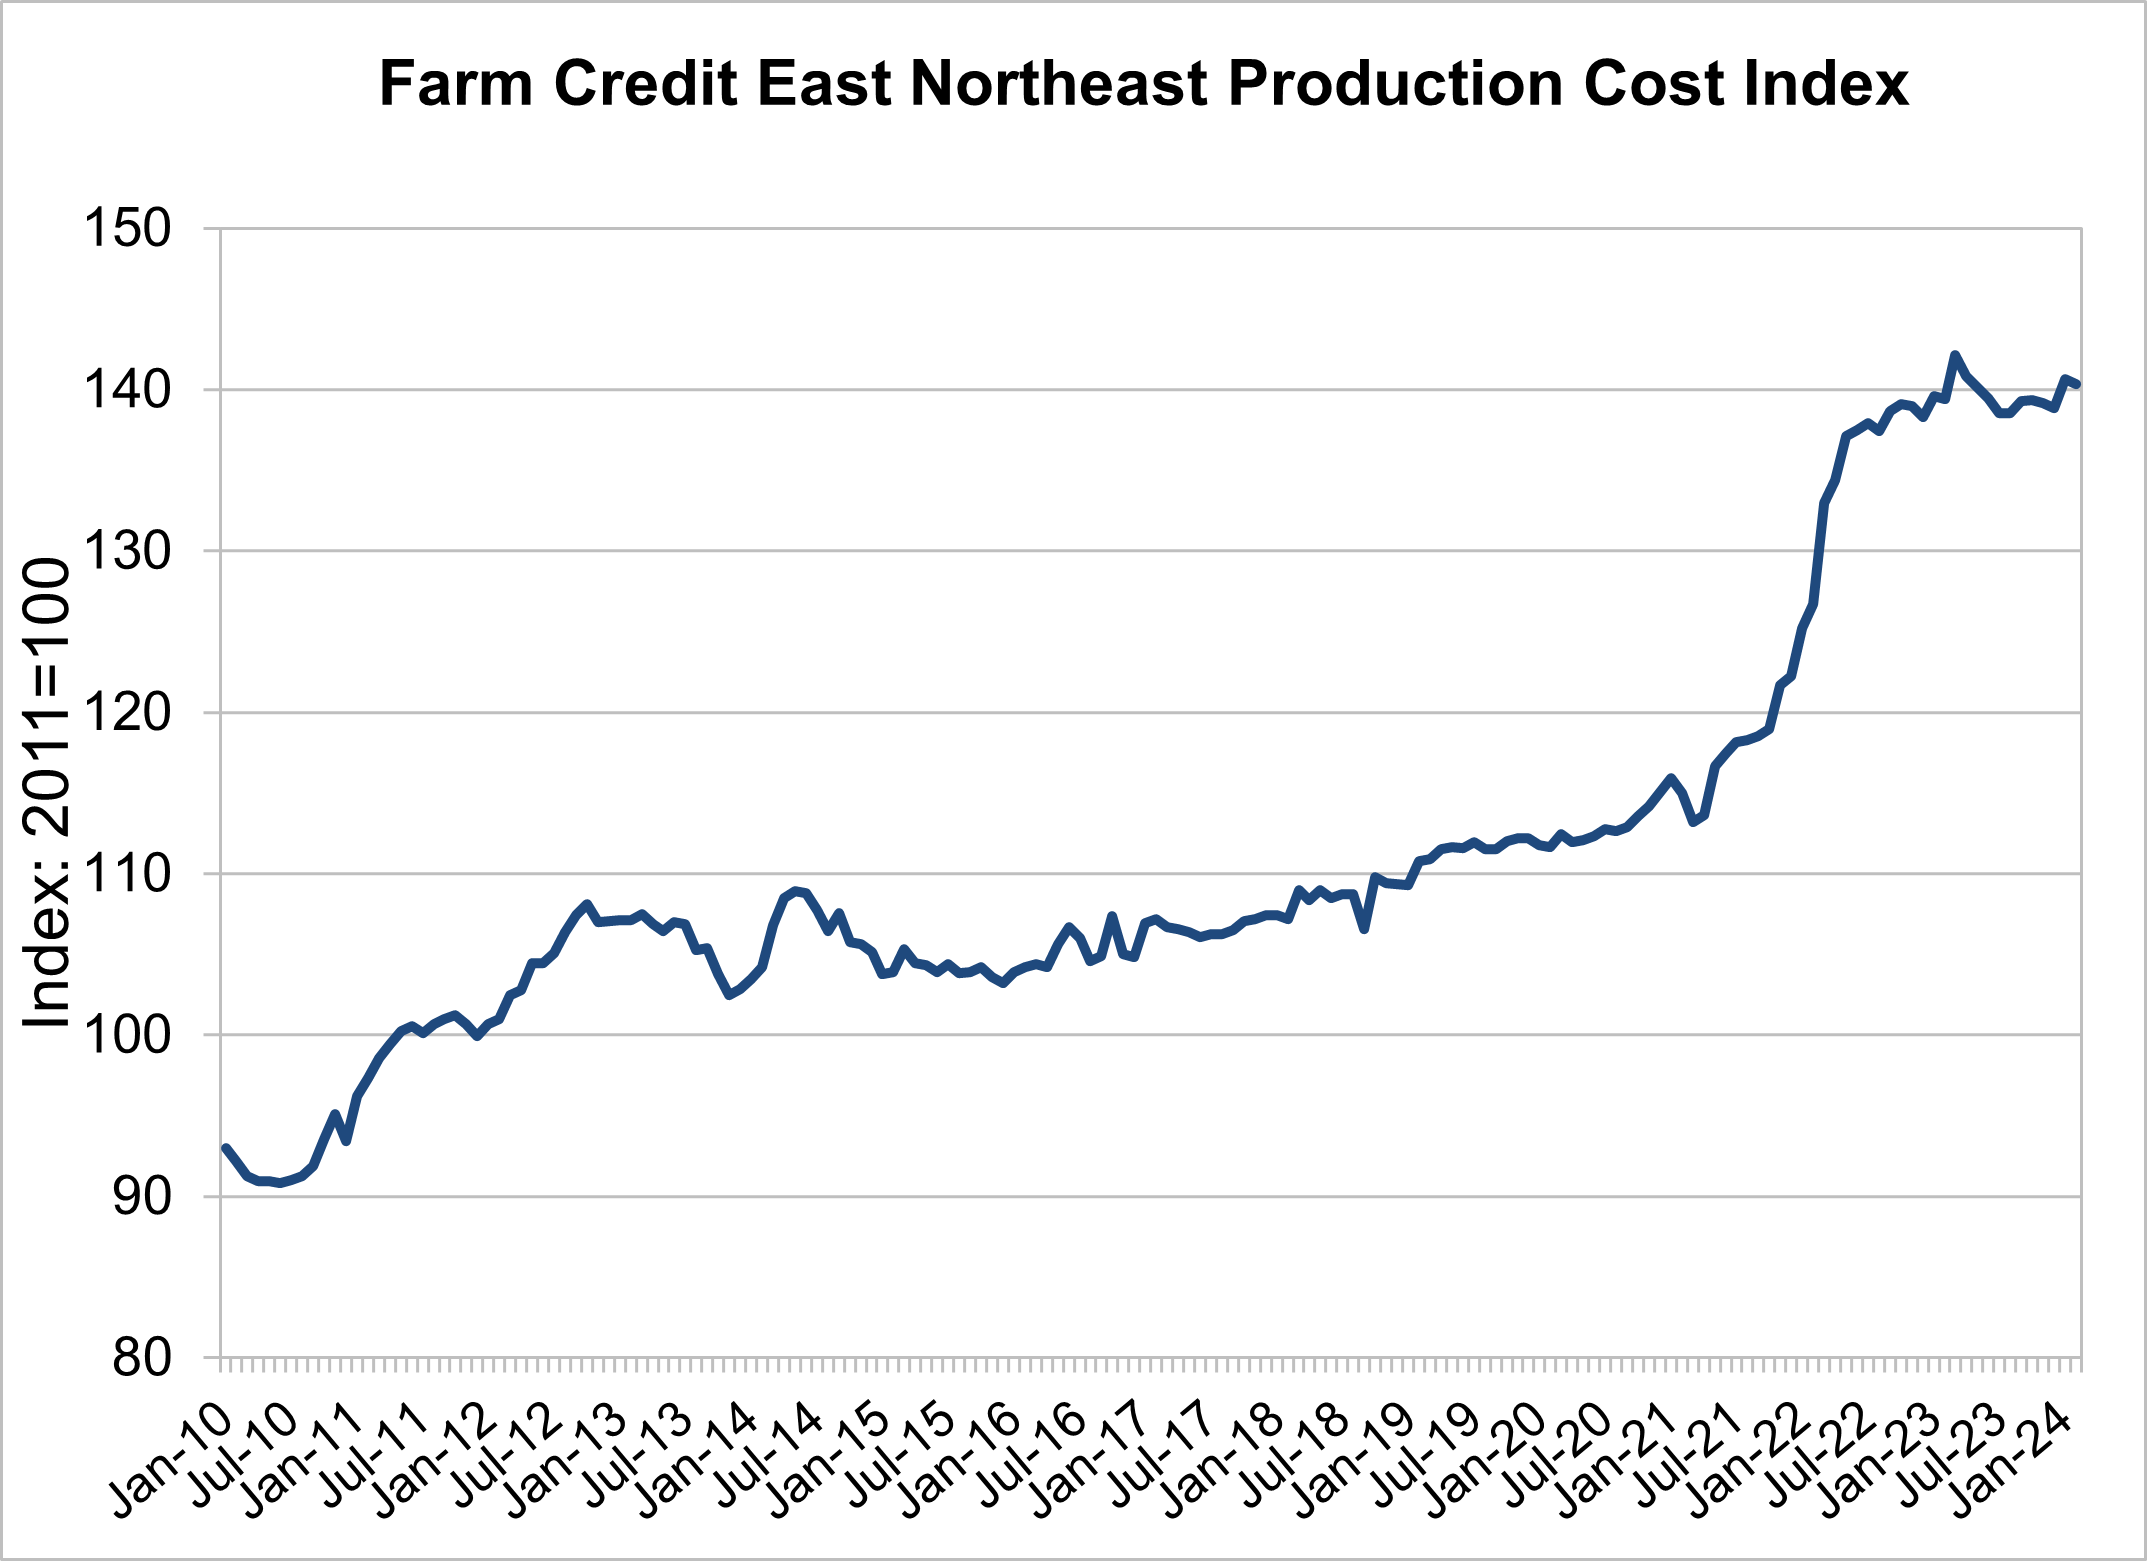 Farm Credit East Northeast Production Cost Index